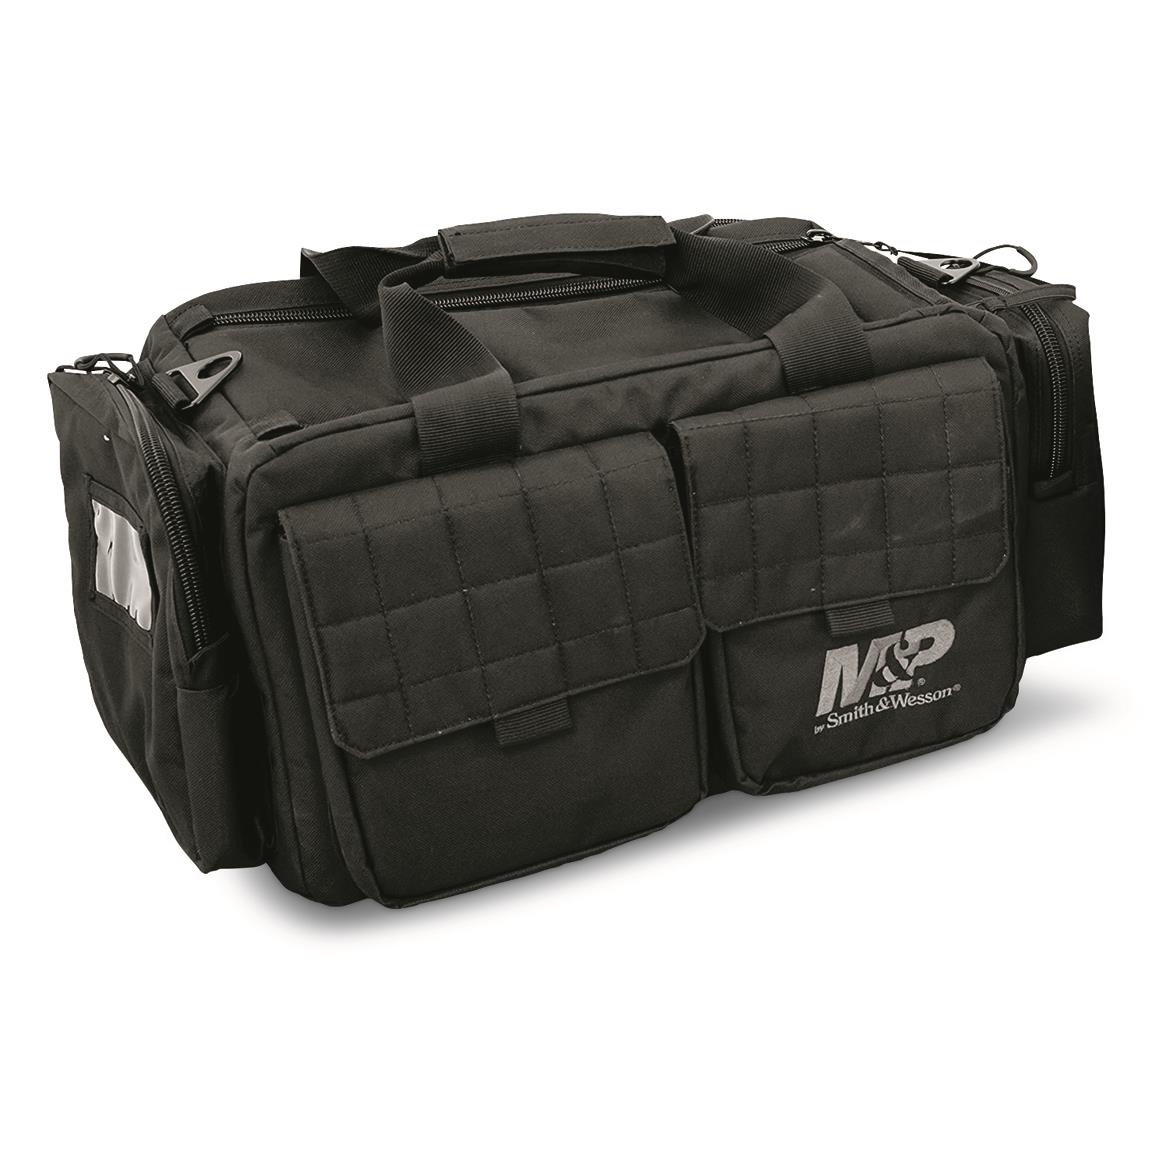 Smith & Wesson Recruit Tactical Range Bag